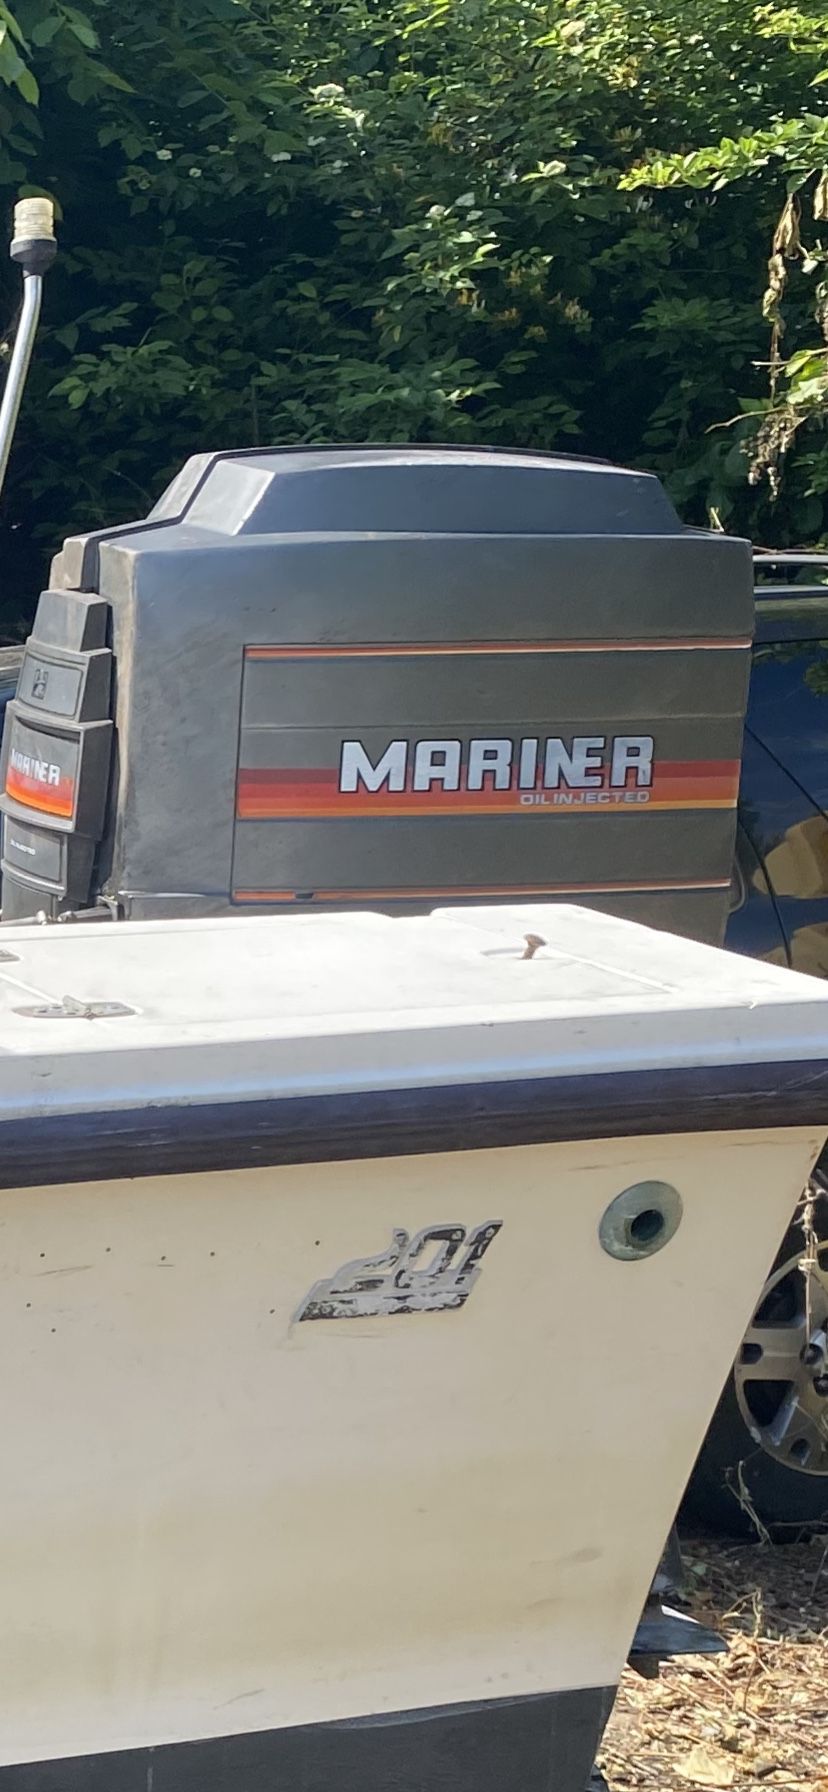 I have a used 1988 Mariner 175 outboard motor 2 stroke